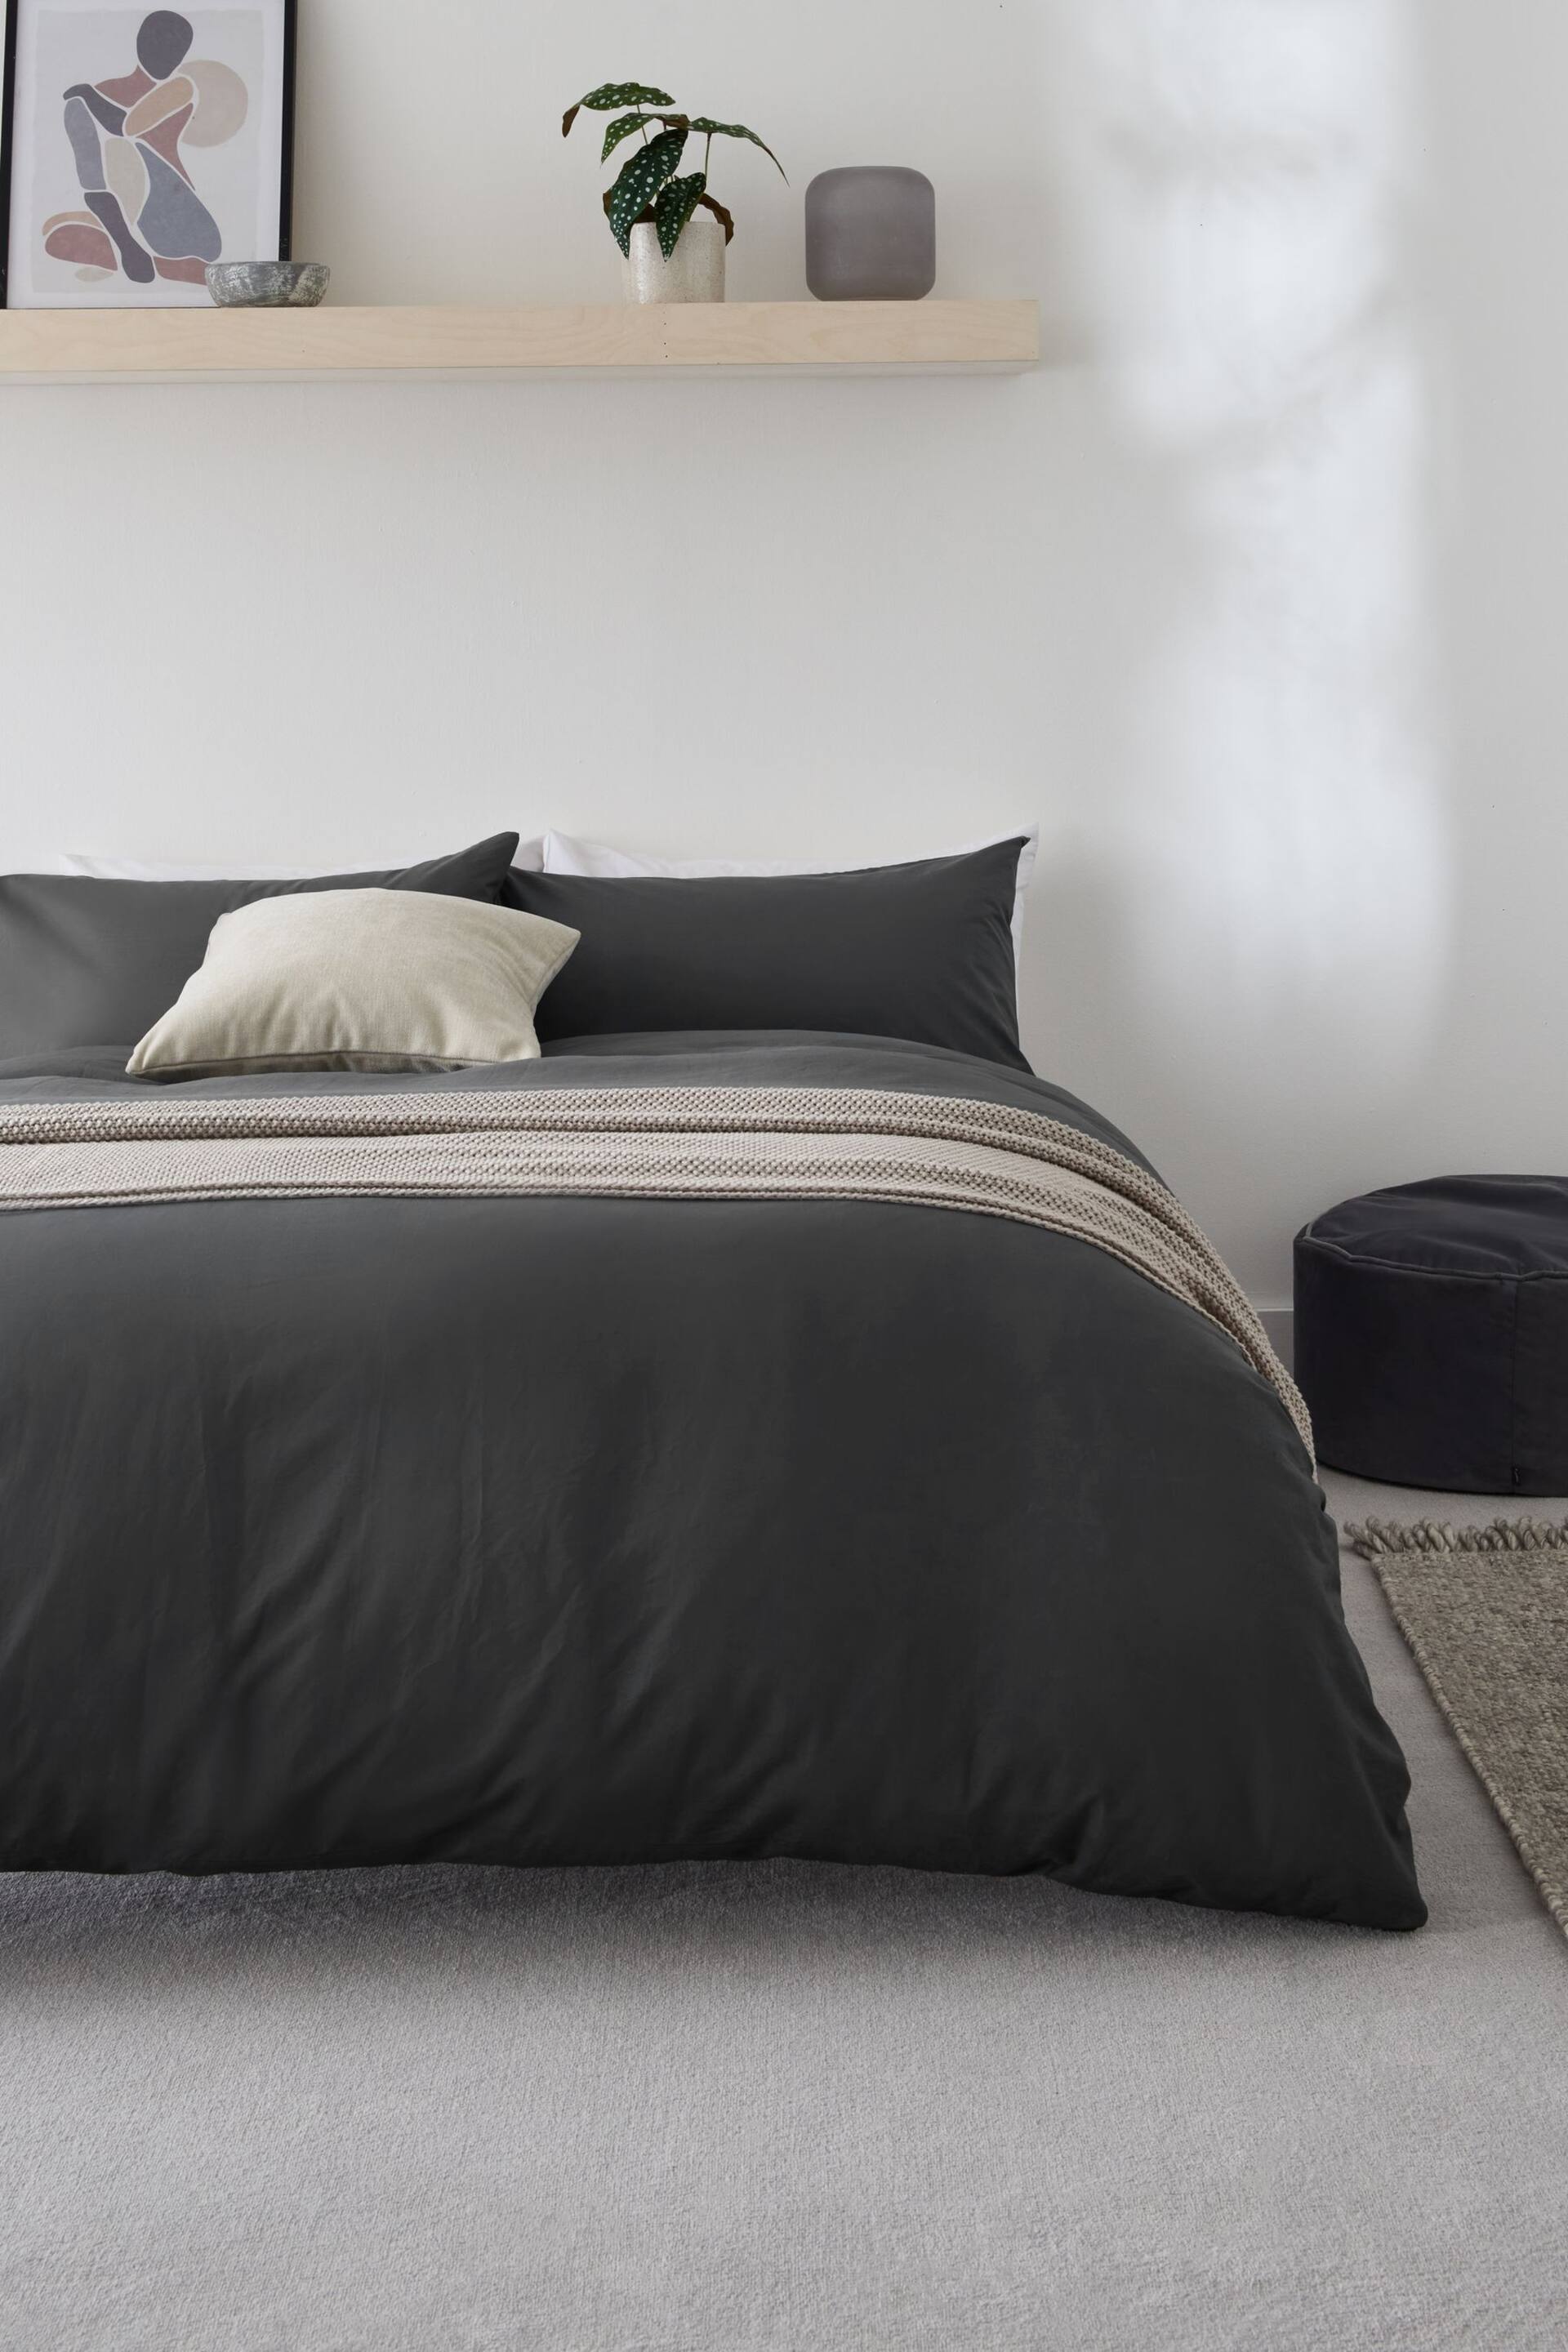 Charcoal Grey Easy Care Polycotton Plain Duvet Cover and Pillowcase Set - Image 2 of 6